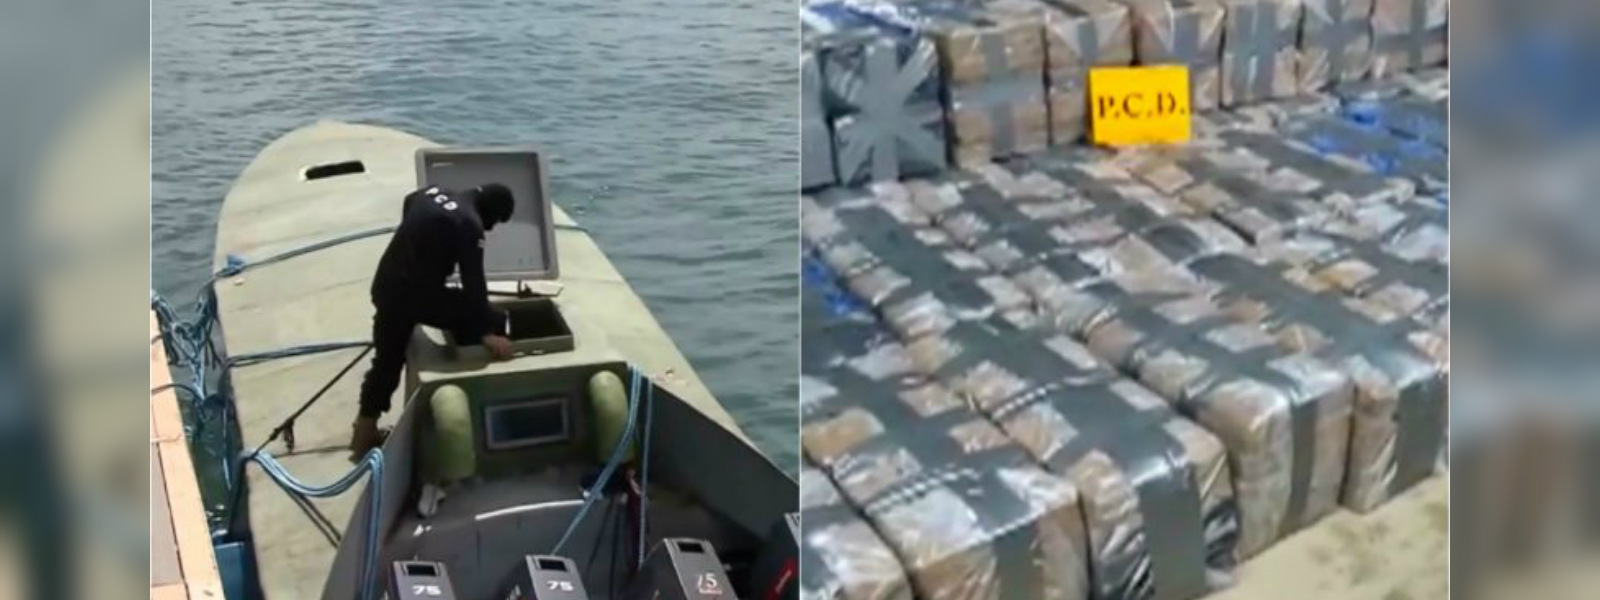 Costa Rica seizes over two tonnes of cocaine